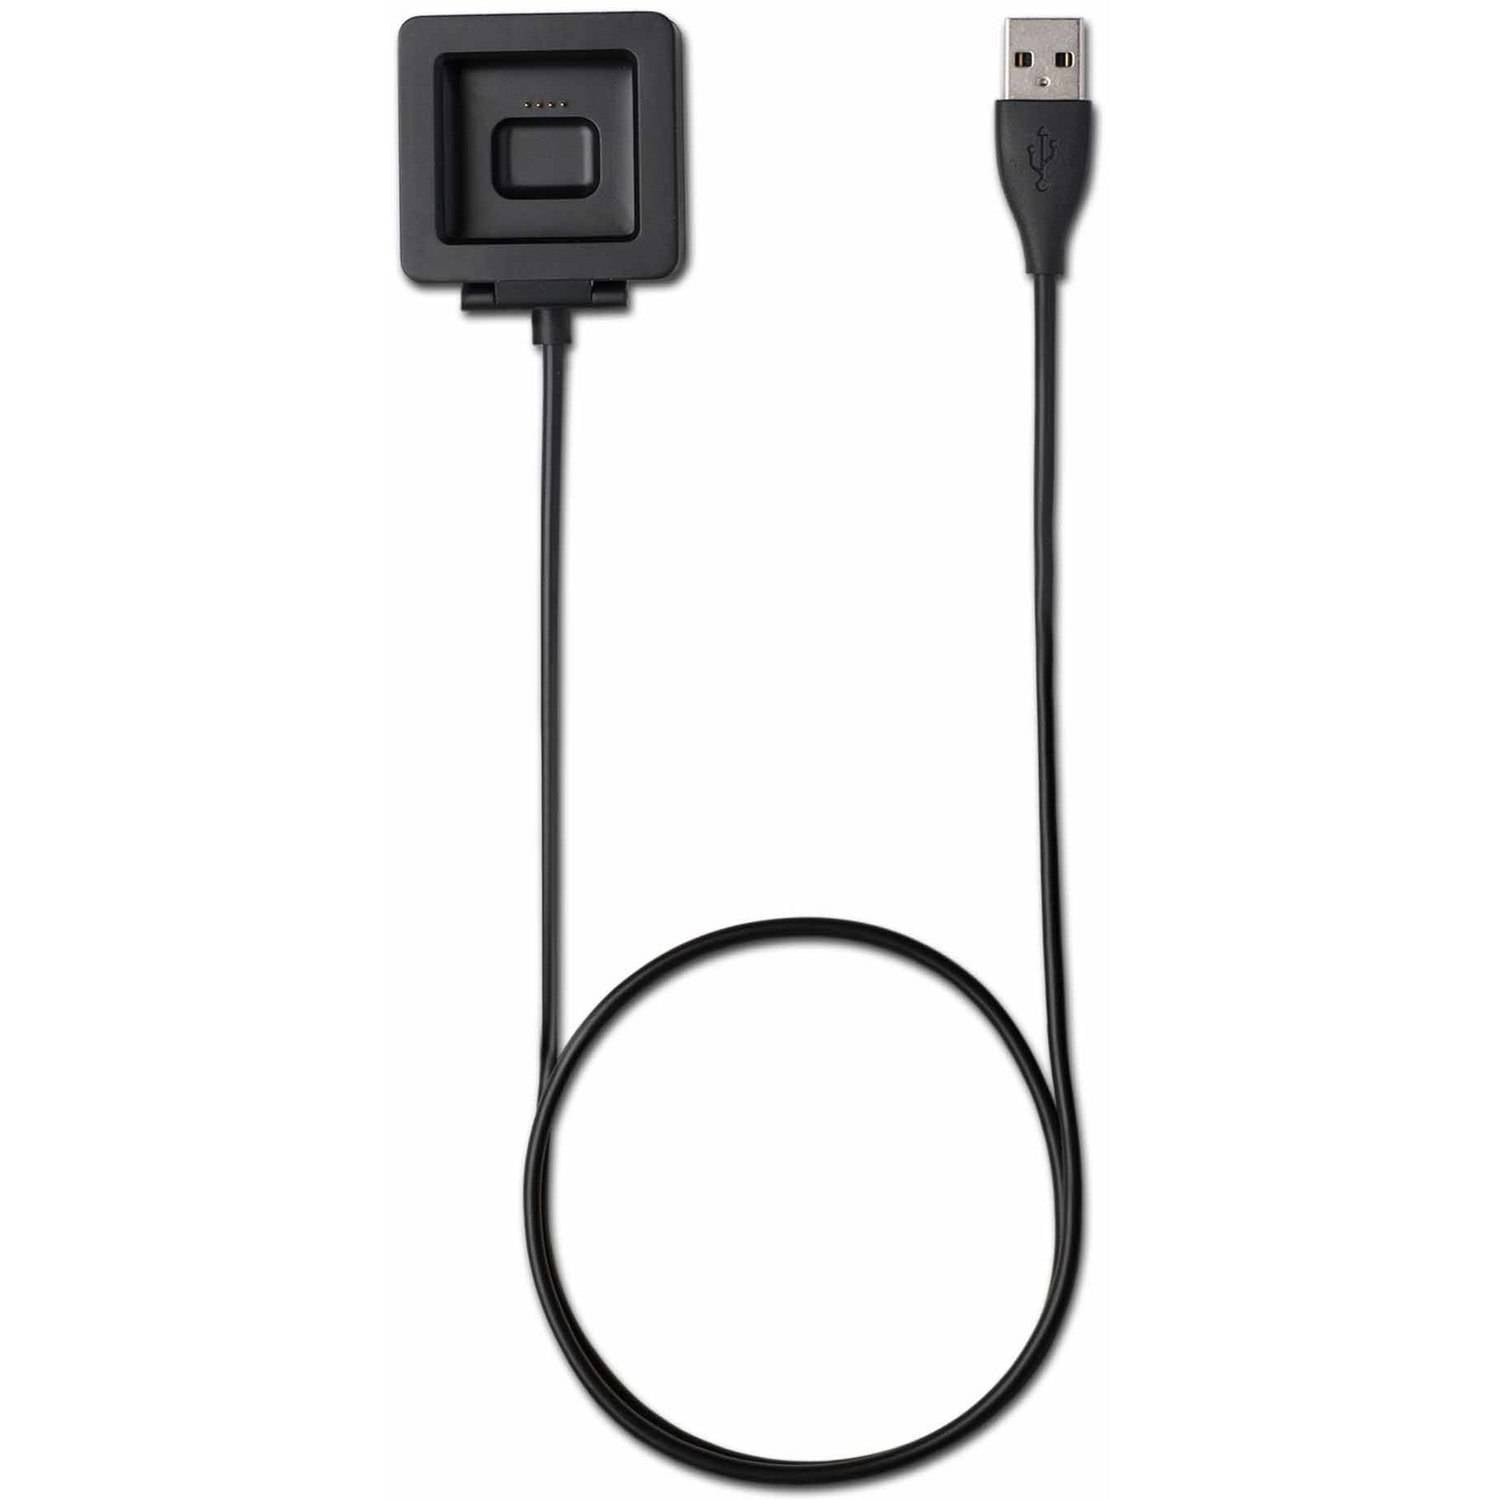 Onn Charger For Fitbit Blaze, Black, 6 